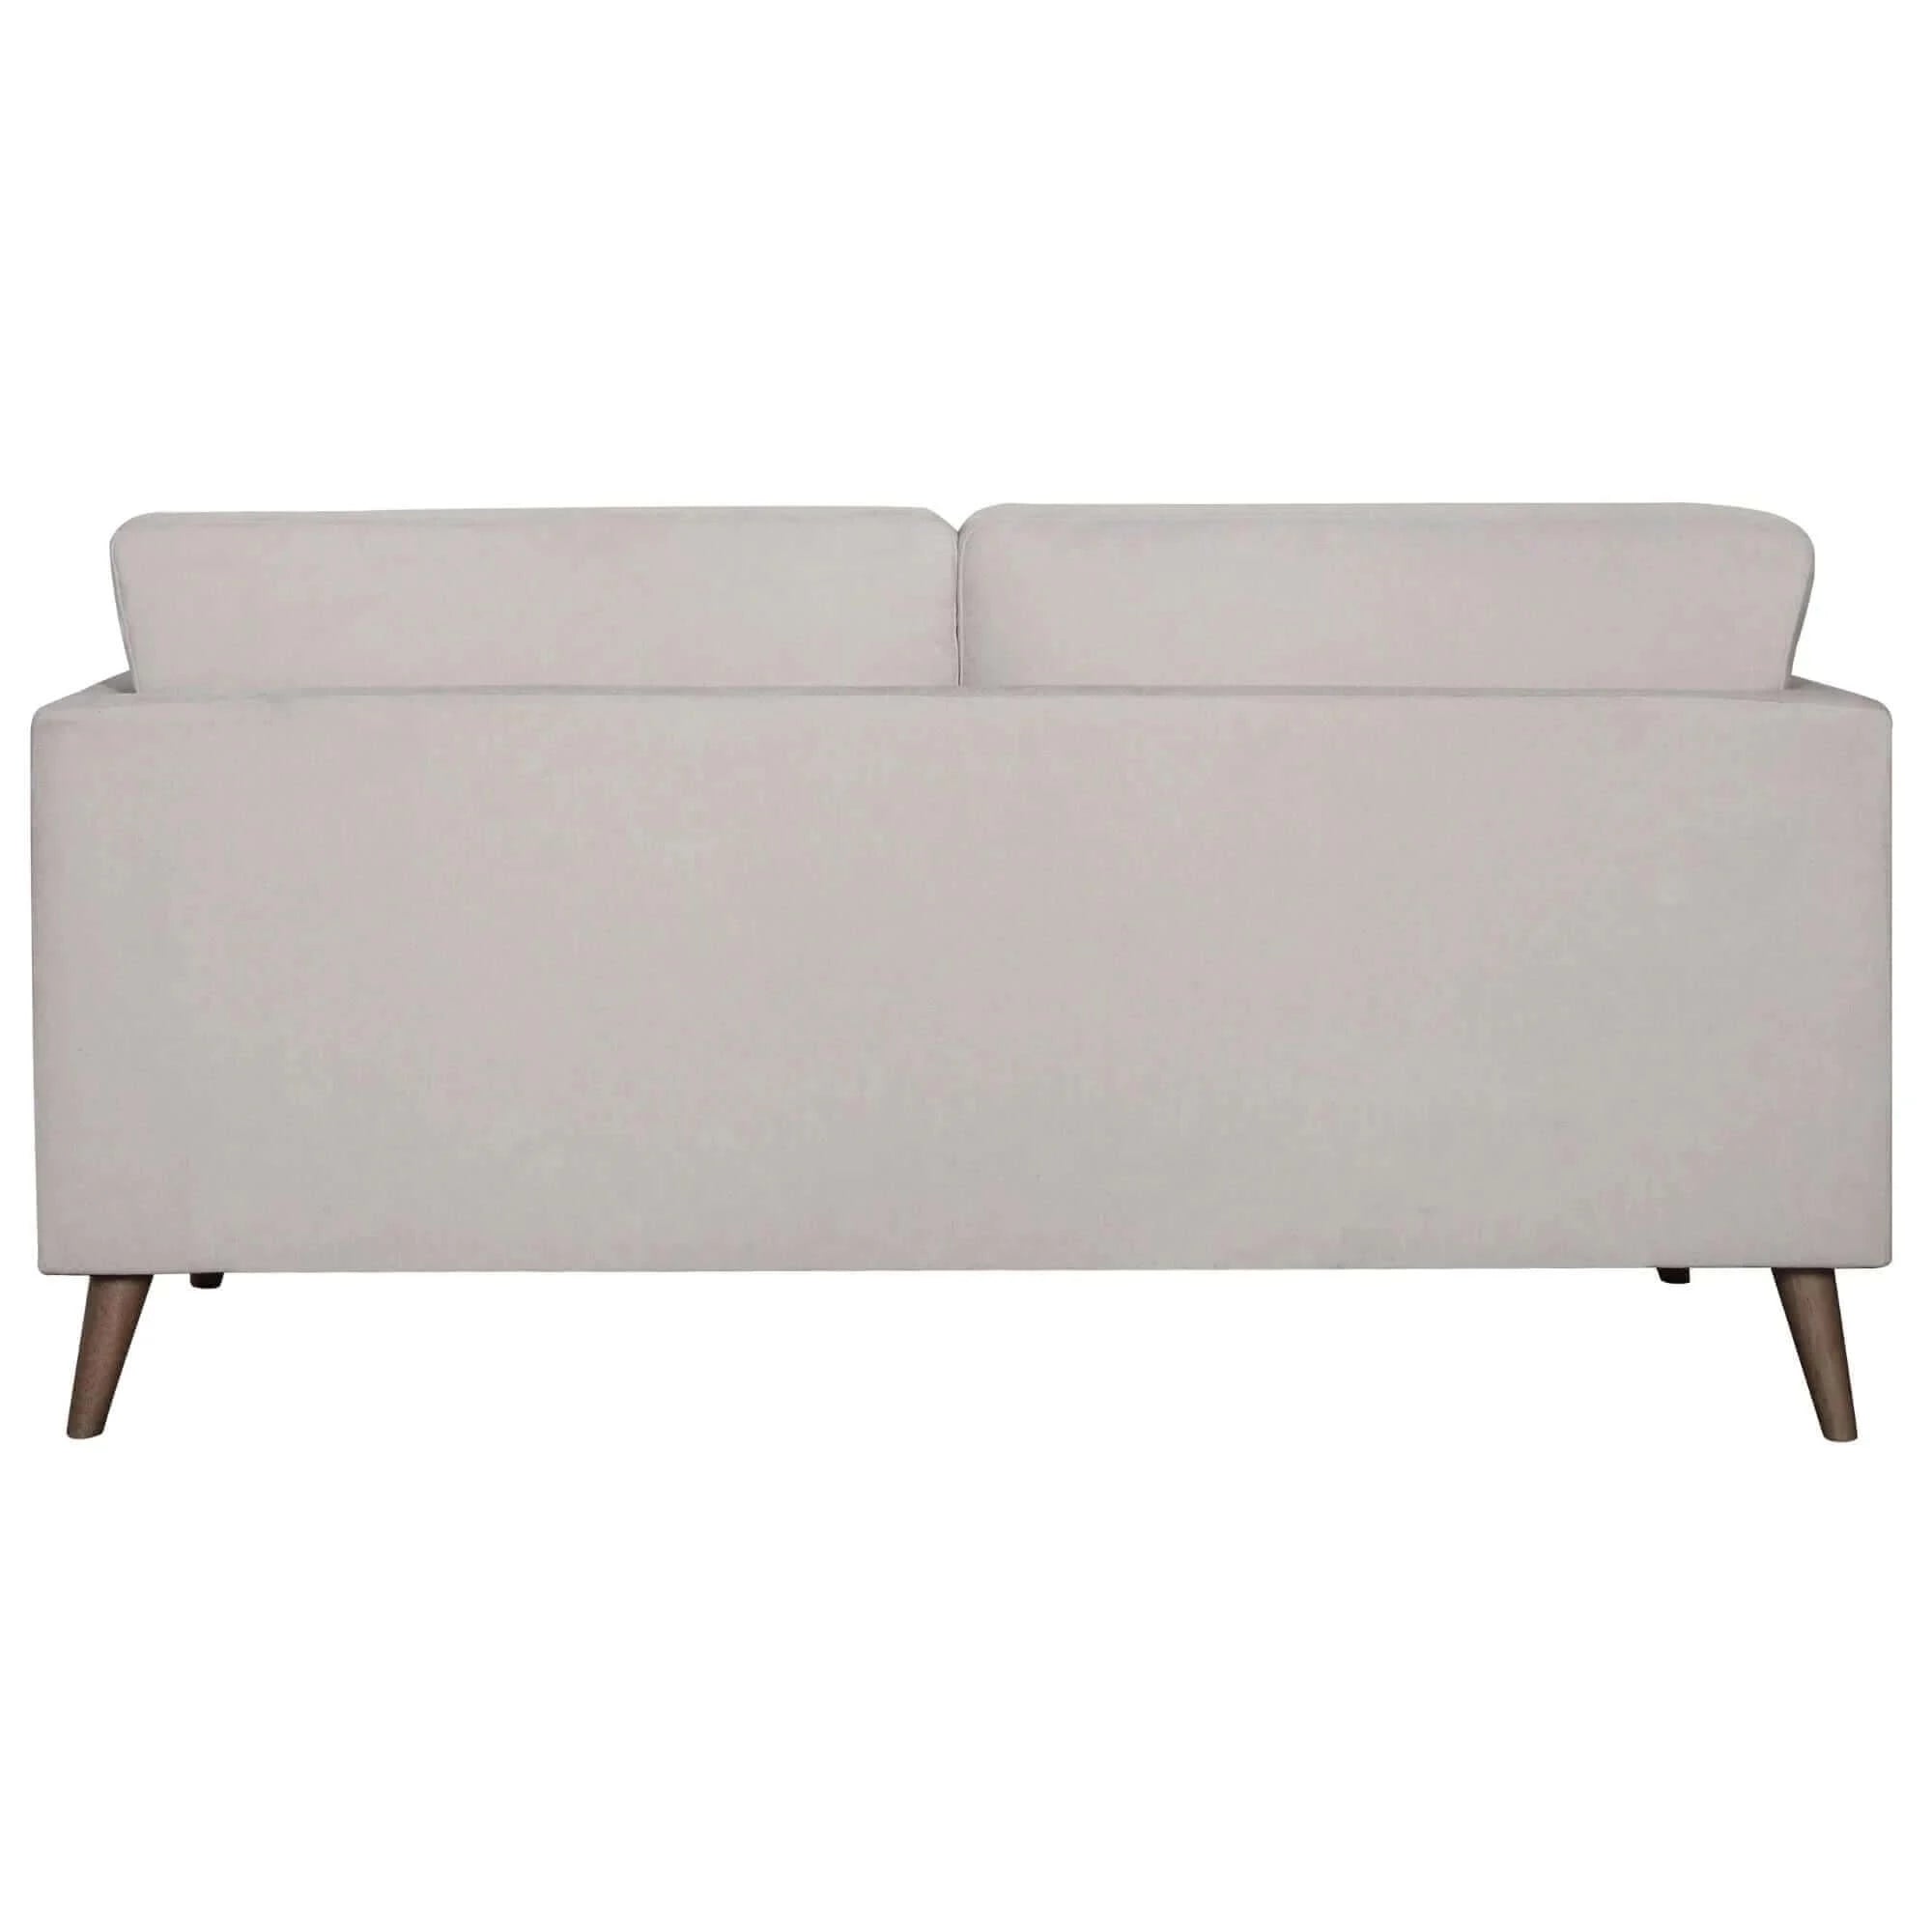 Buy Nooa 2 Seater Sofa Fabric Uplholstered Lounge Couch – Upinteriors-Upinteriors